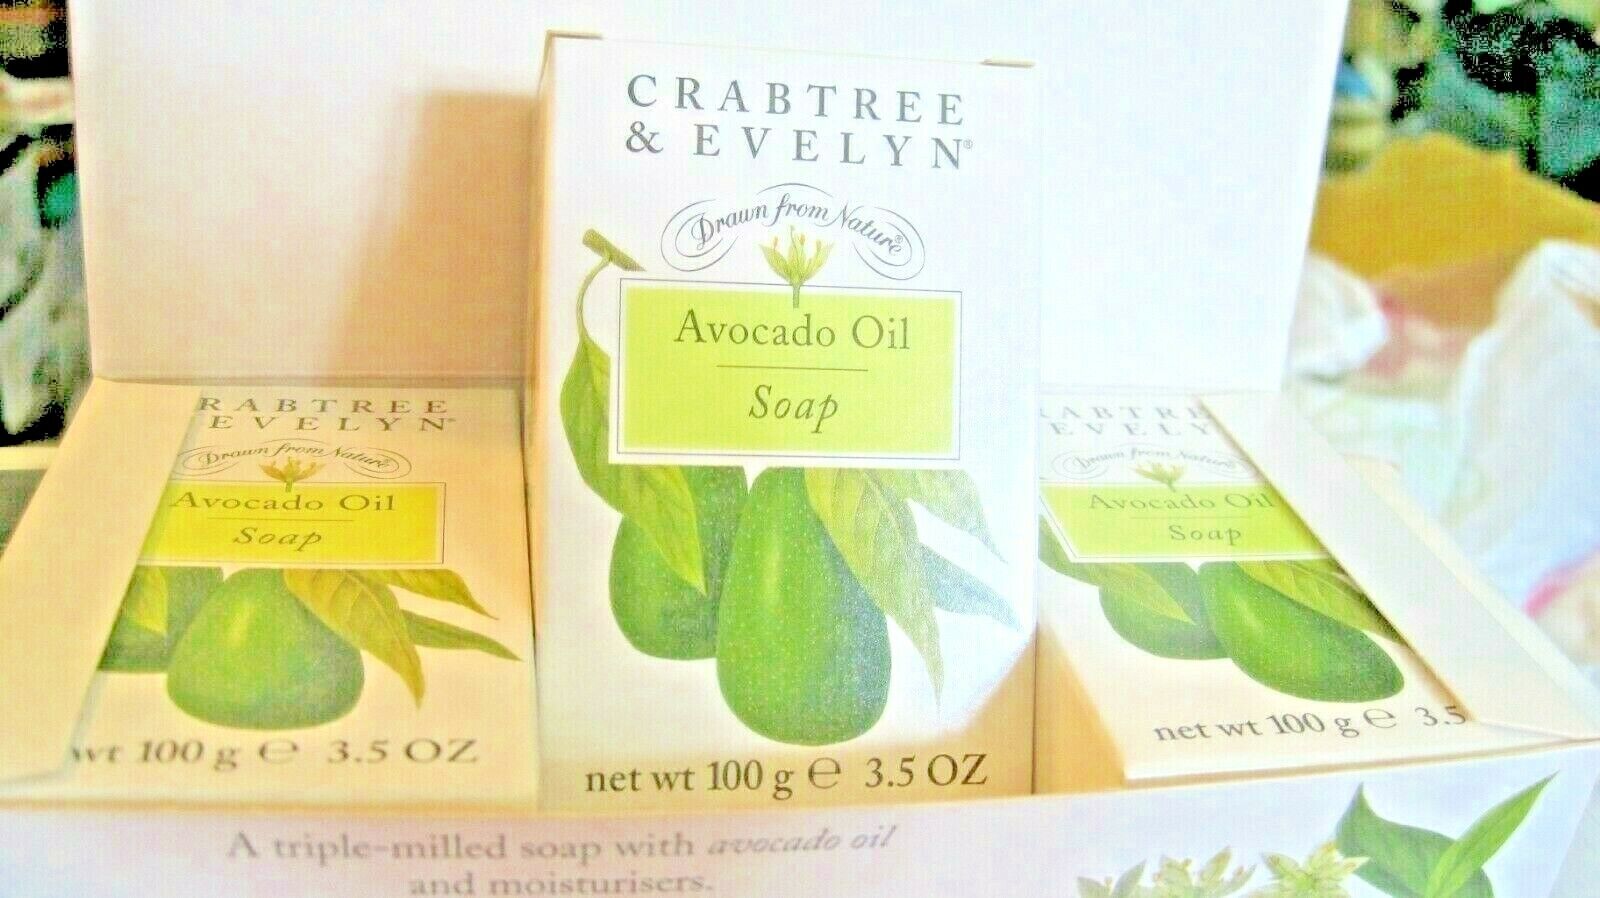 3 Bars Vintage CRABTREE & EVELYN AVOCADO OIL SOAP DRY SKIN Drawn From Nature NIB